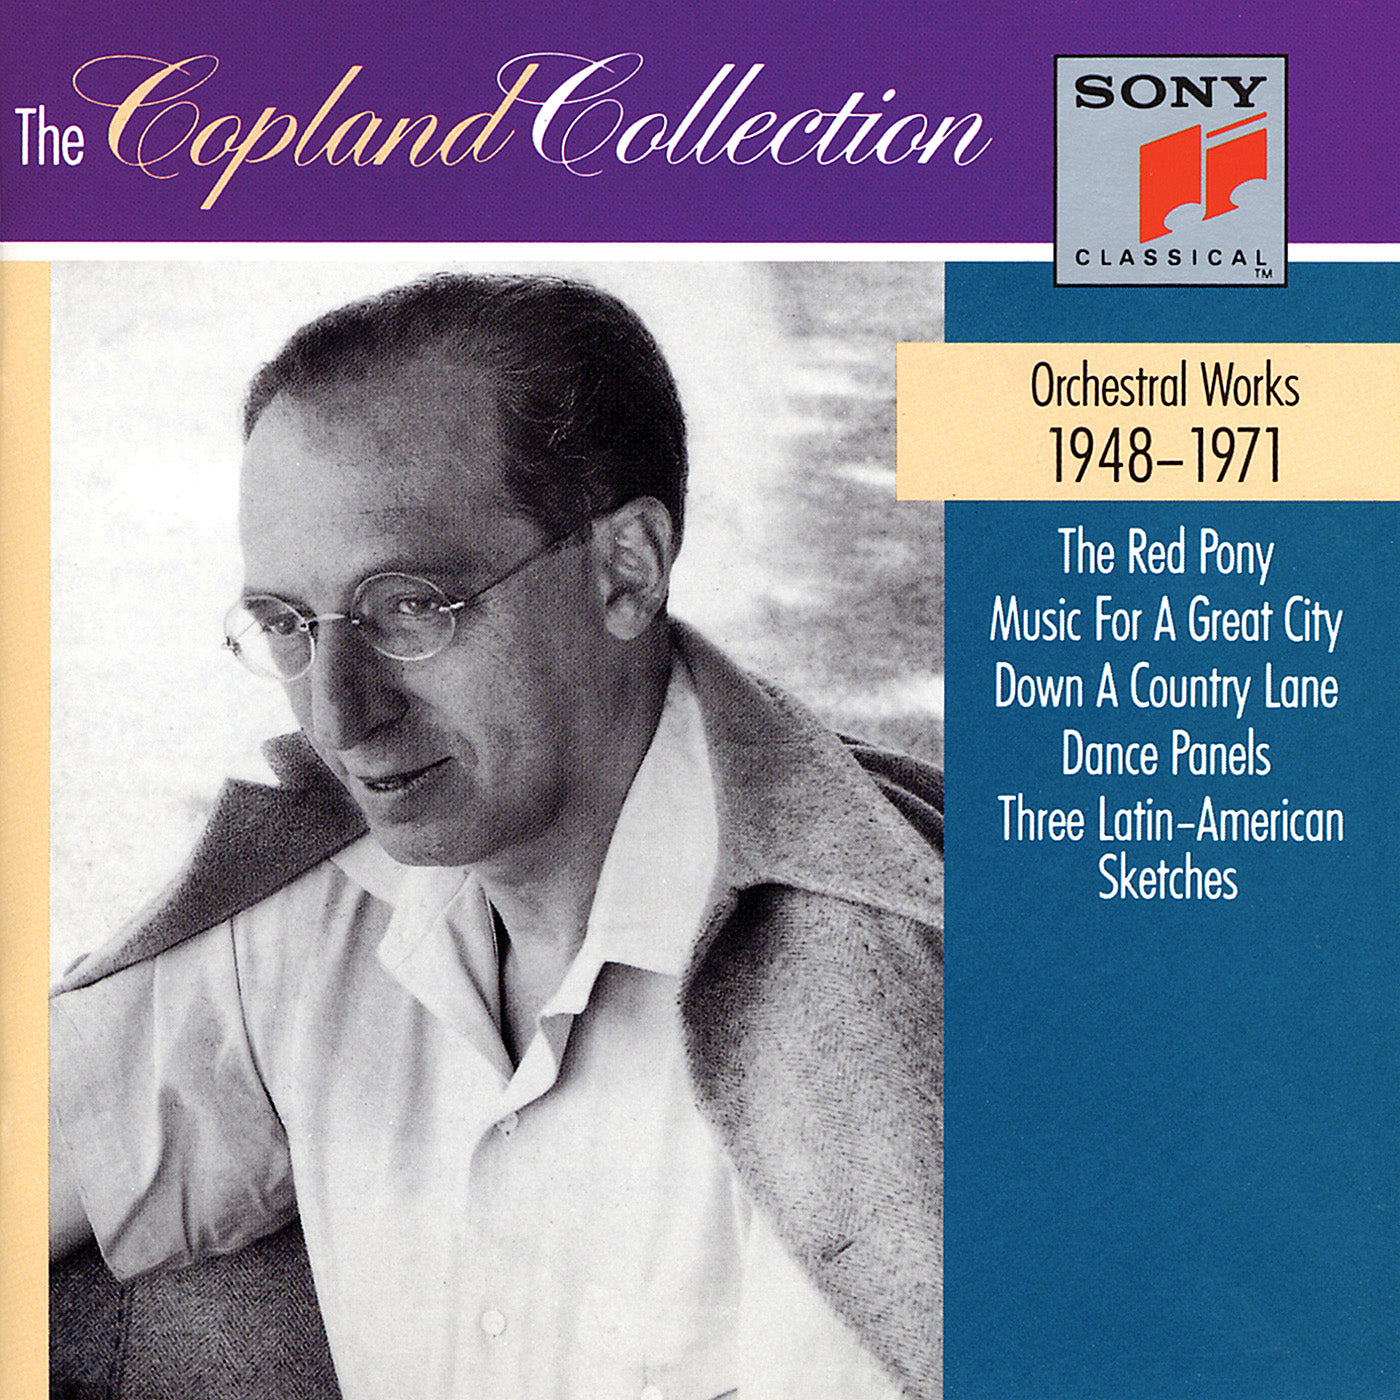 Aaron Copland Collection 1948-1971 [2 CDs]